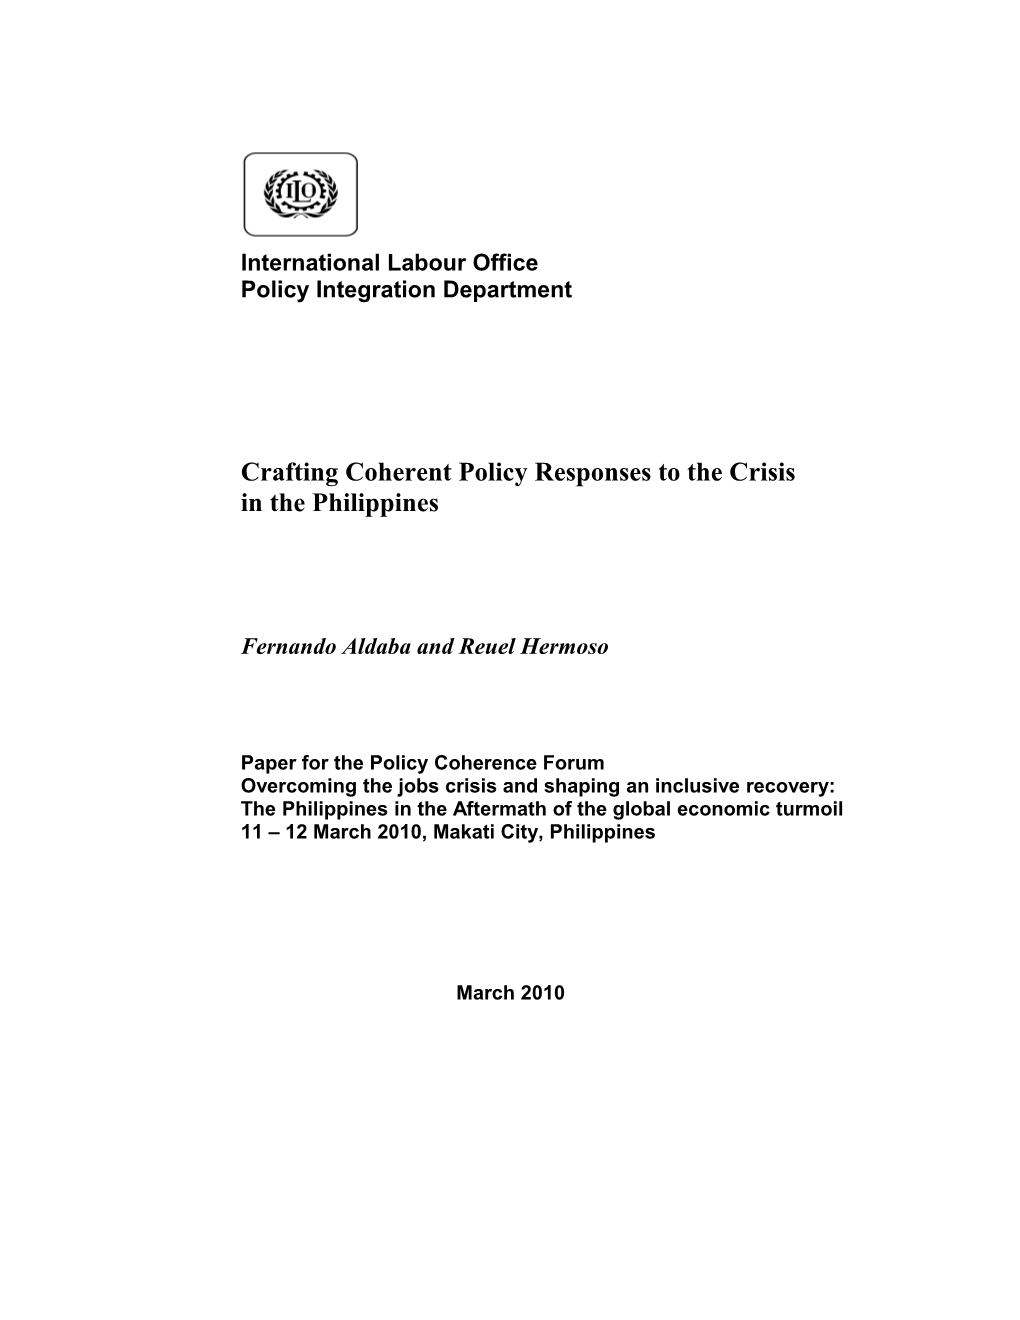 Crafting Coherent Policy Responses to the Crisis